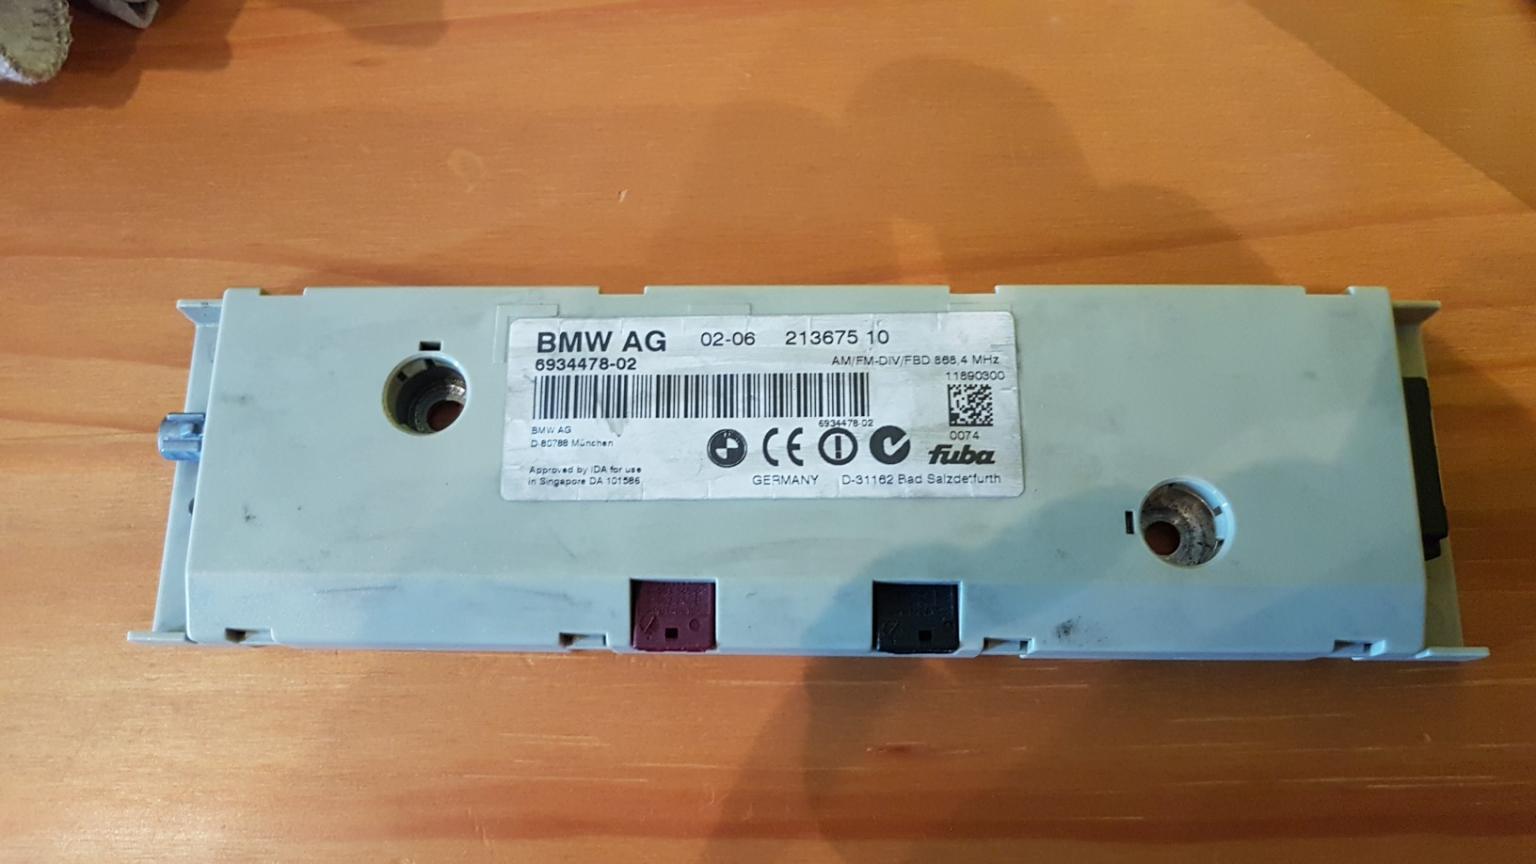 BMW E61 Diversity Antenna Amplifier in TW3 Hounslow for £